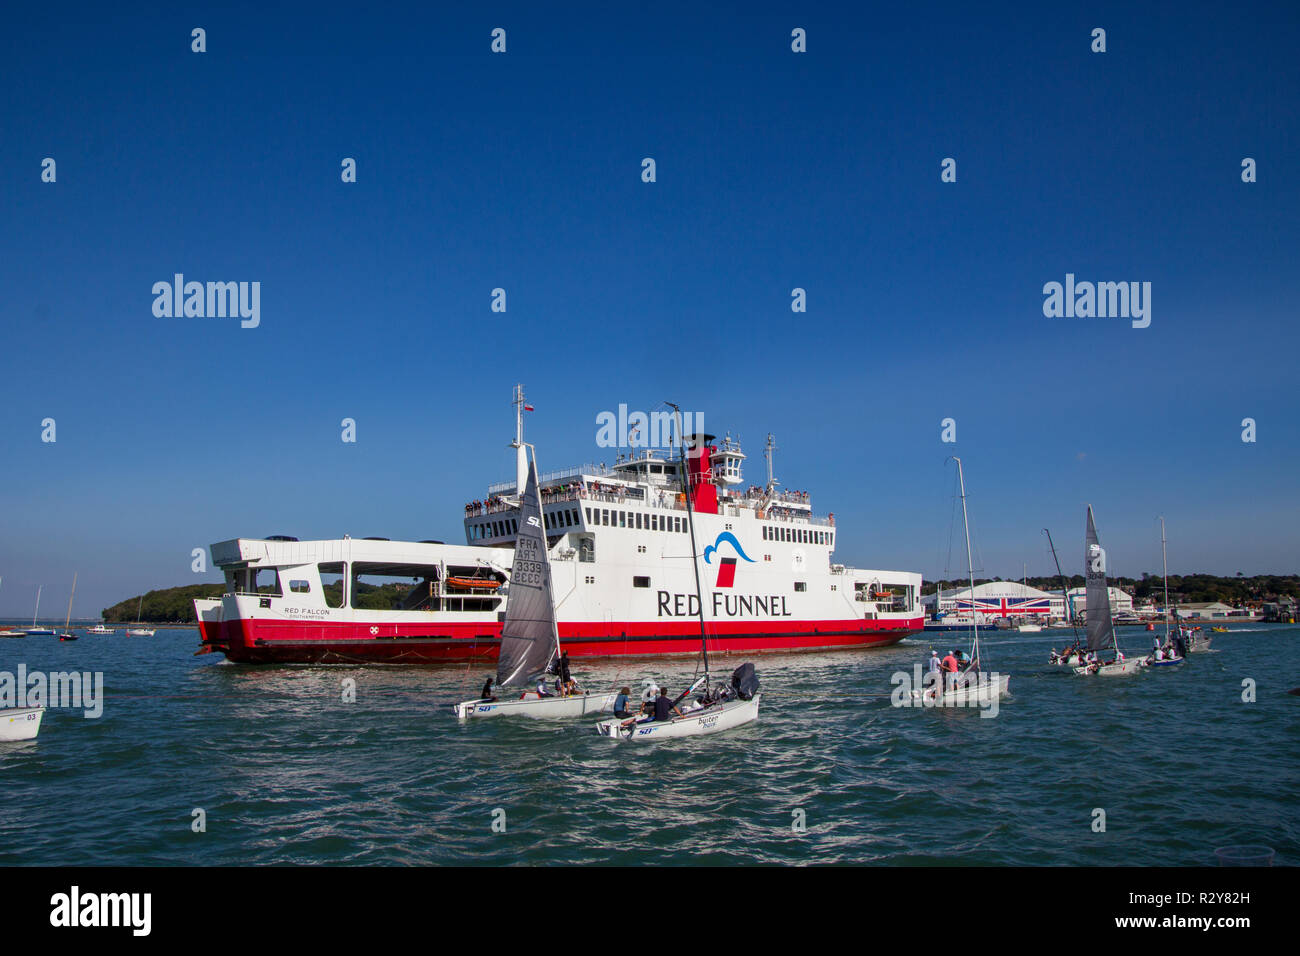 Red Funnel Ferry 'Red Falcon' Passing a Line of Dinghies, Cowes, Isle of Wight, UK Stock Photo